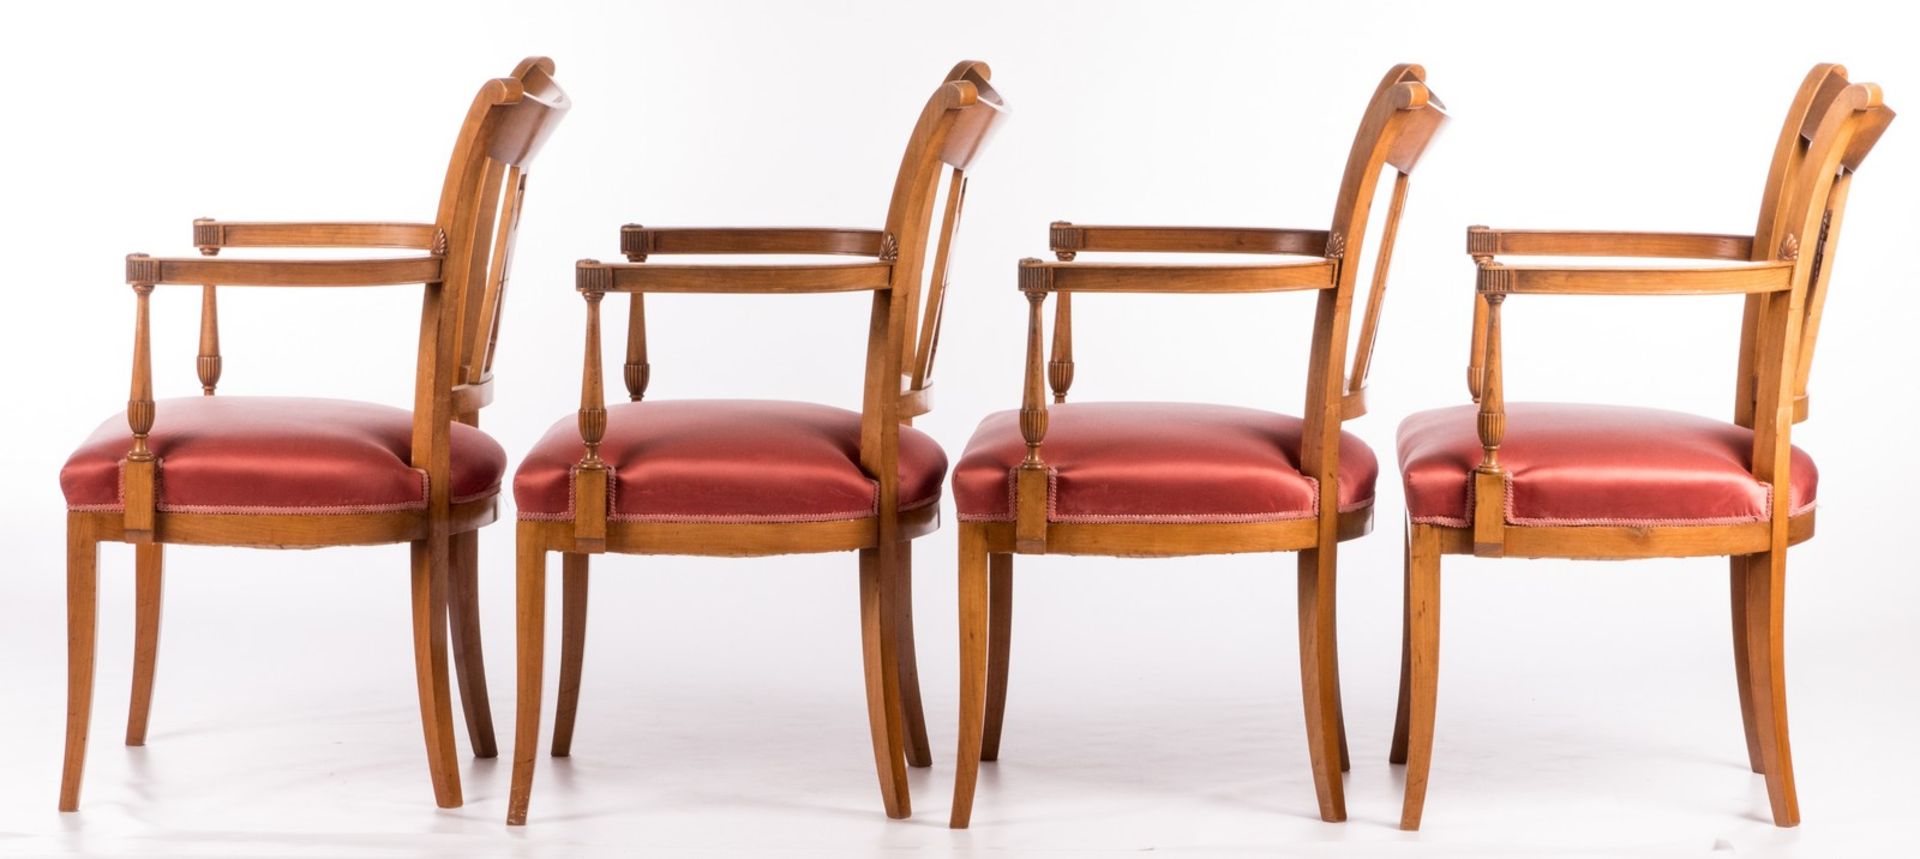 Aa set of four French directoire style cherrywood armchairs, H 88,5 - W 56 - D 59,5 cm - Bild 2 aus 8